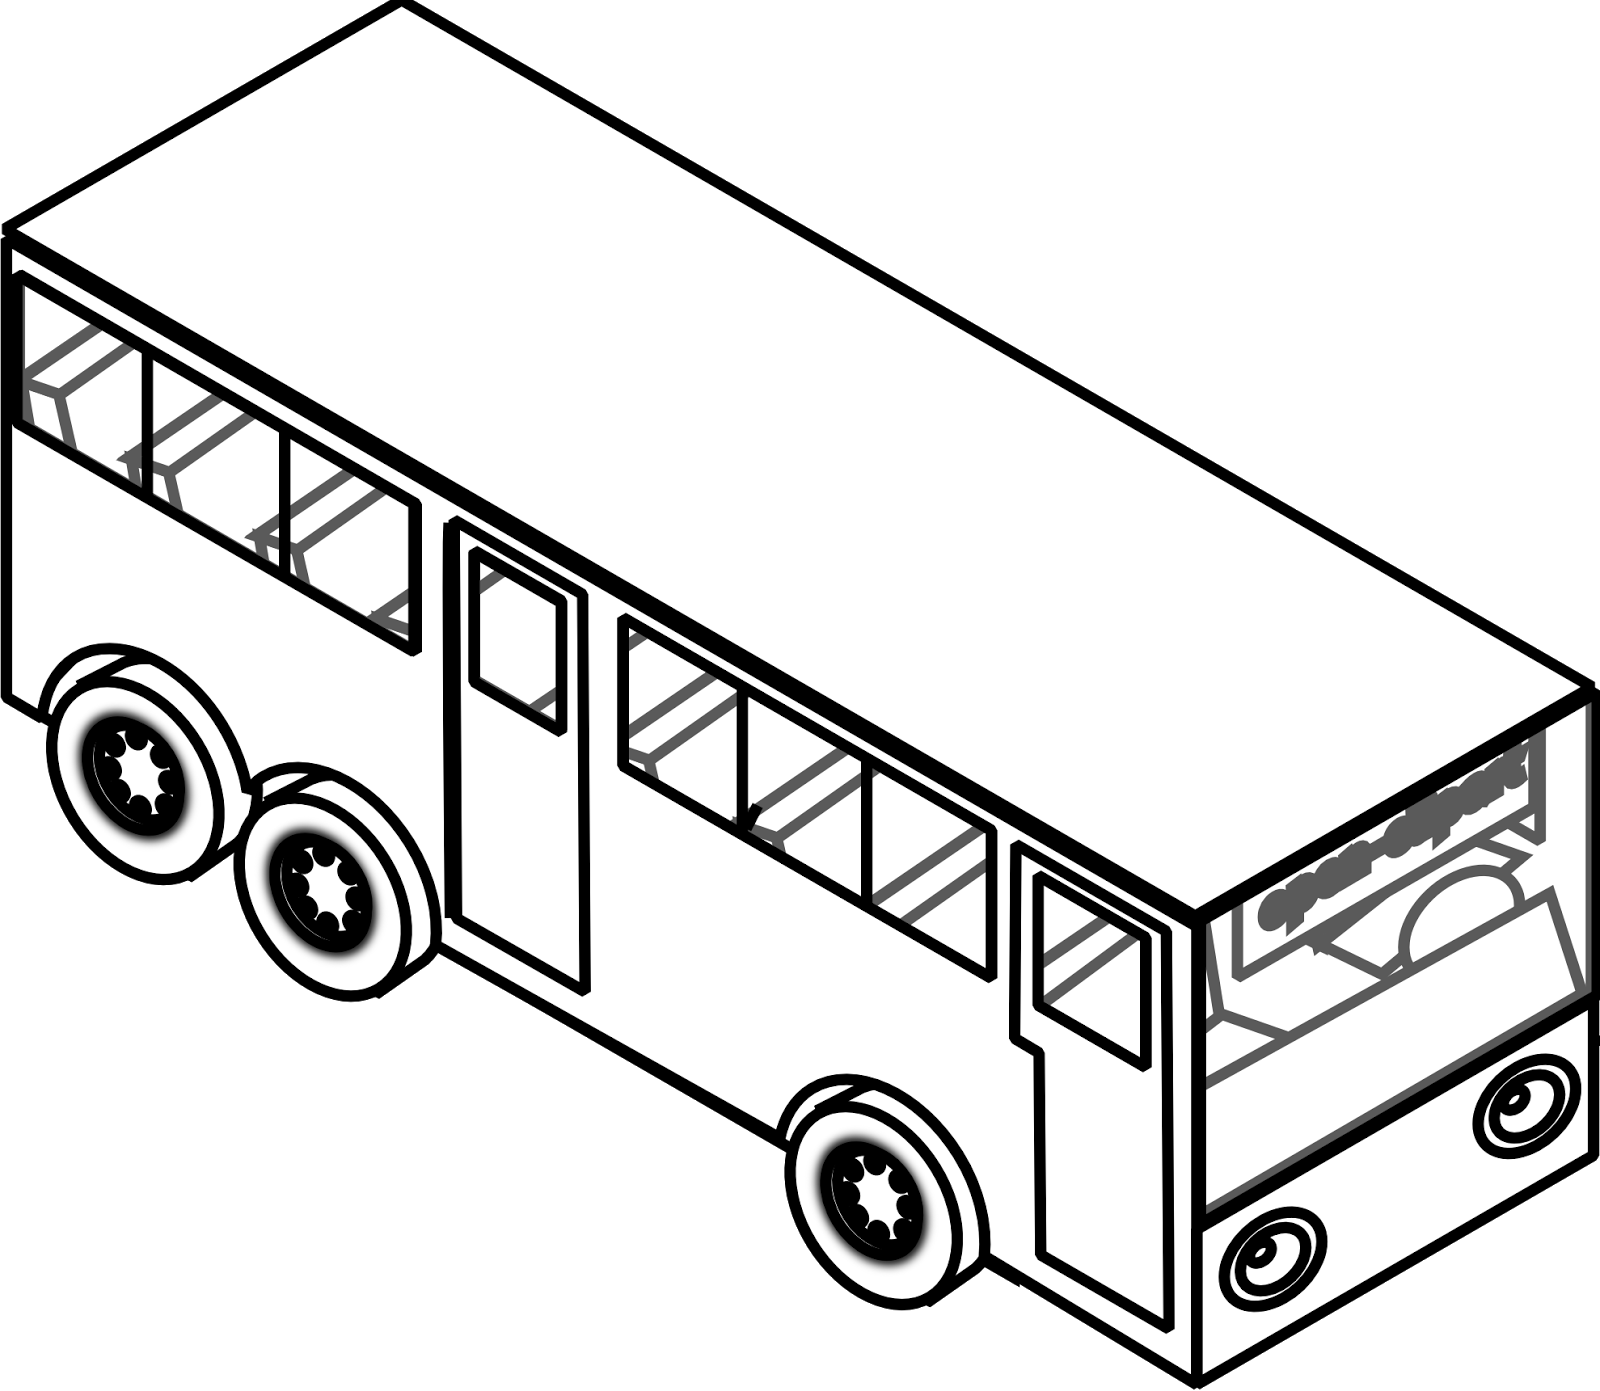 Transportation For Kids Coloring Pages: Bus The Car Coloring Pages